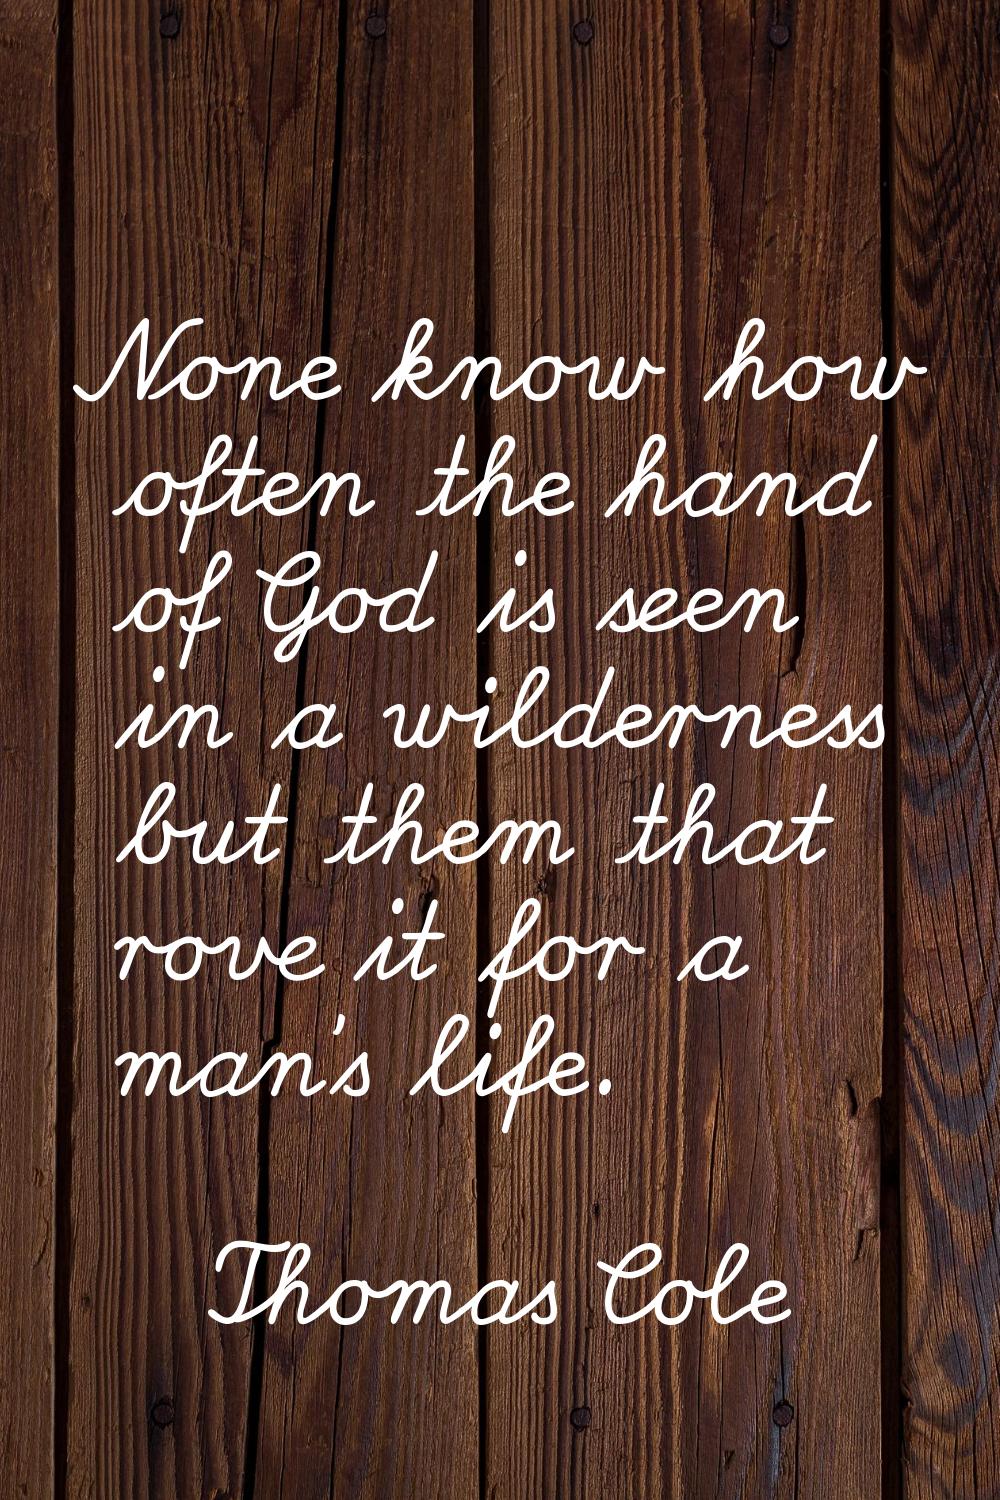 None know how often the hand of God is seen in a wilderness but them that rove it for a man's life.